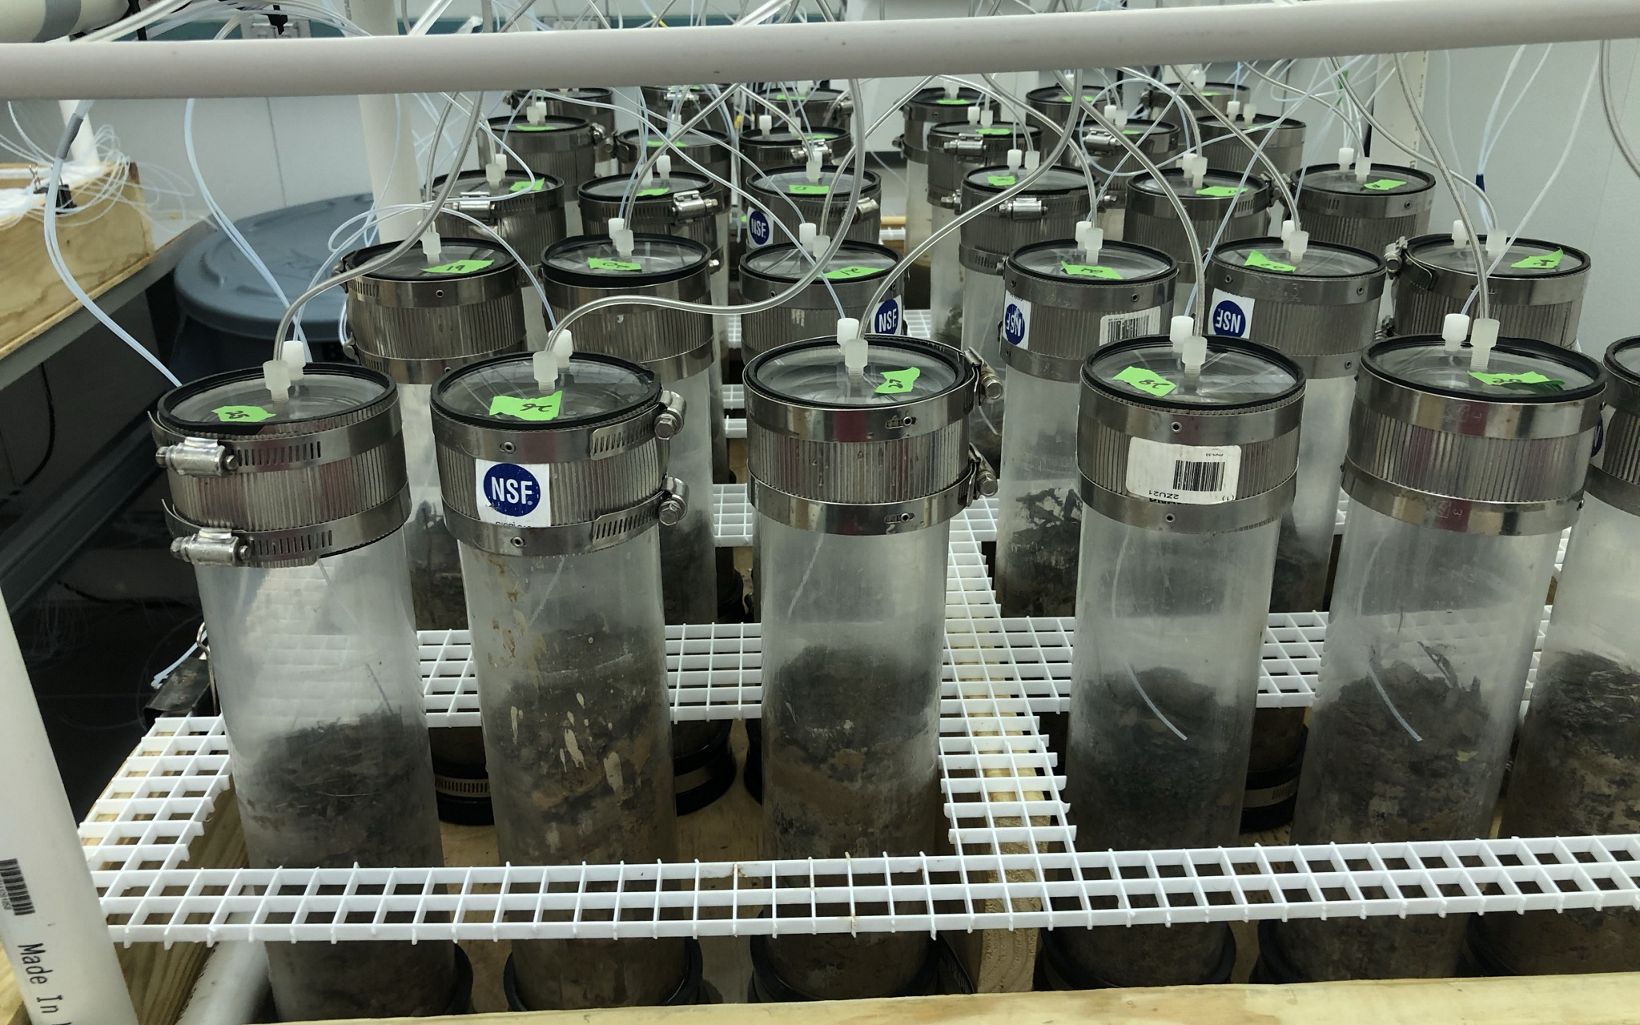 
                
                   Collected samples are studied in this flow through incubation system to measure nutrient retention and greenhouse gas production in wetland easement soil/sediment cores.
                  
                
              